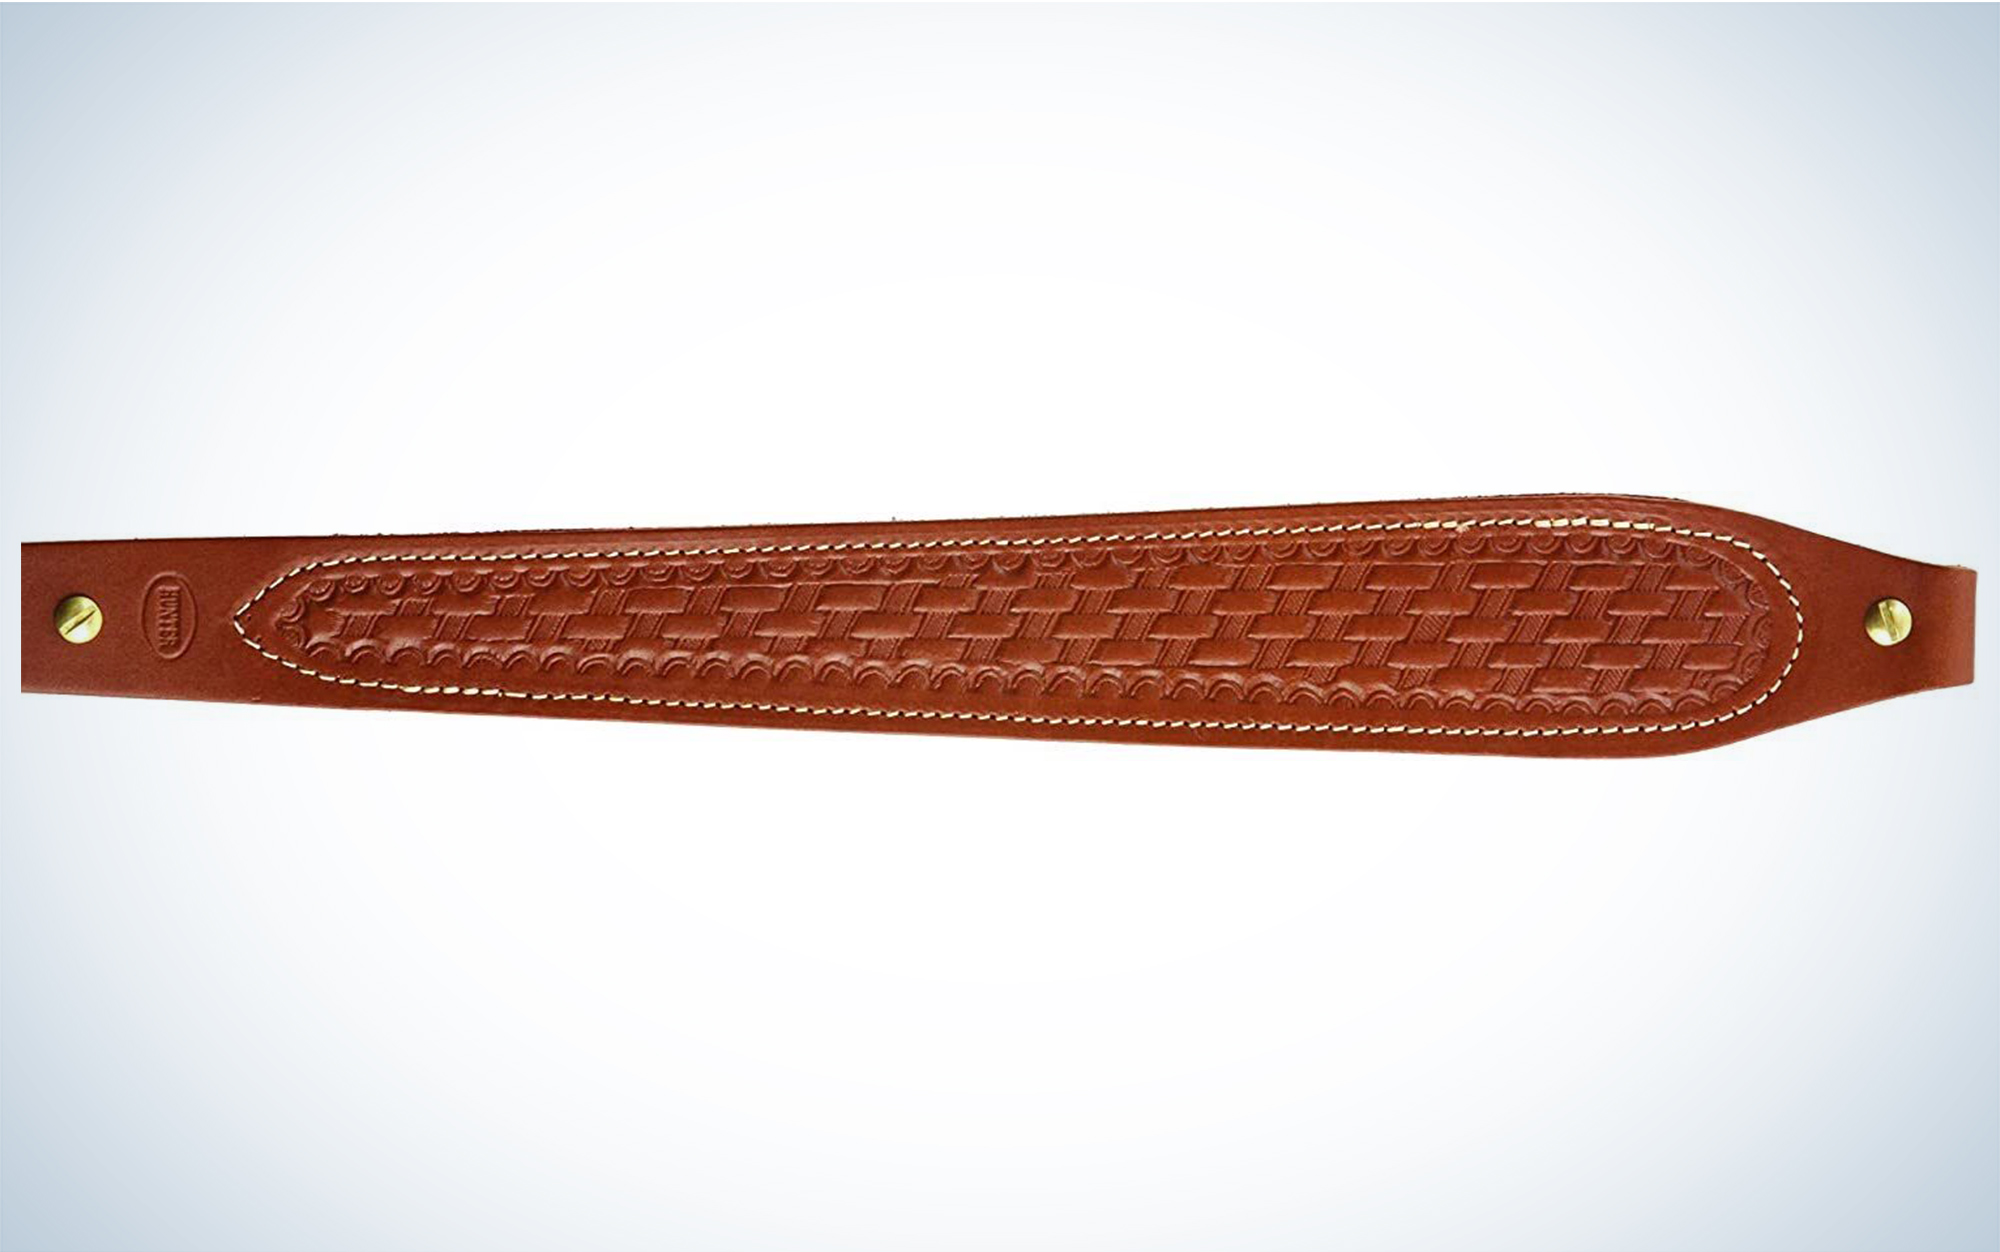 The Hunter Company Cobra-Style Sling is made of leather.